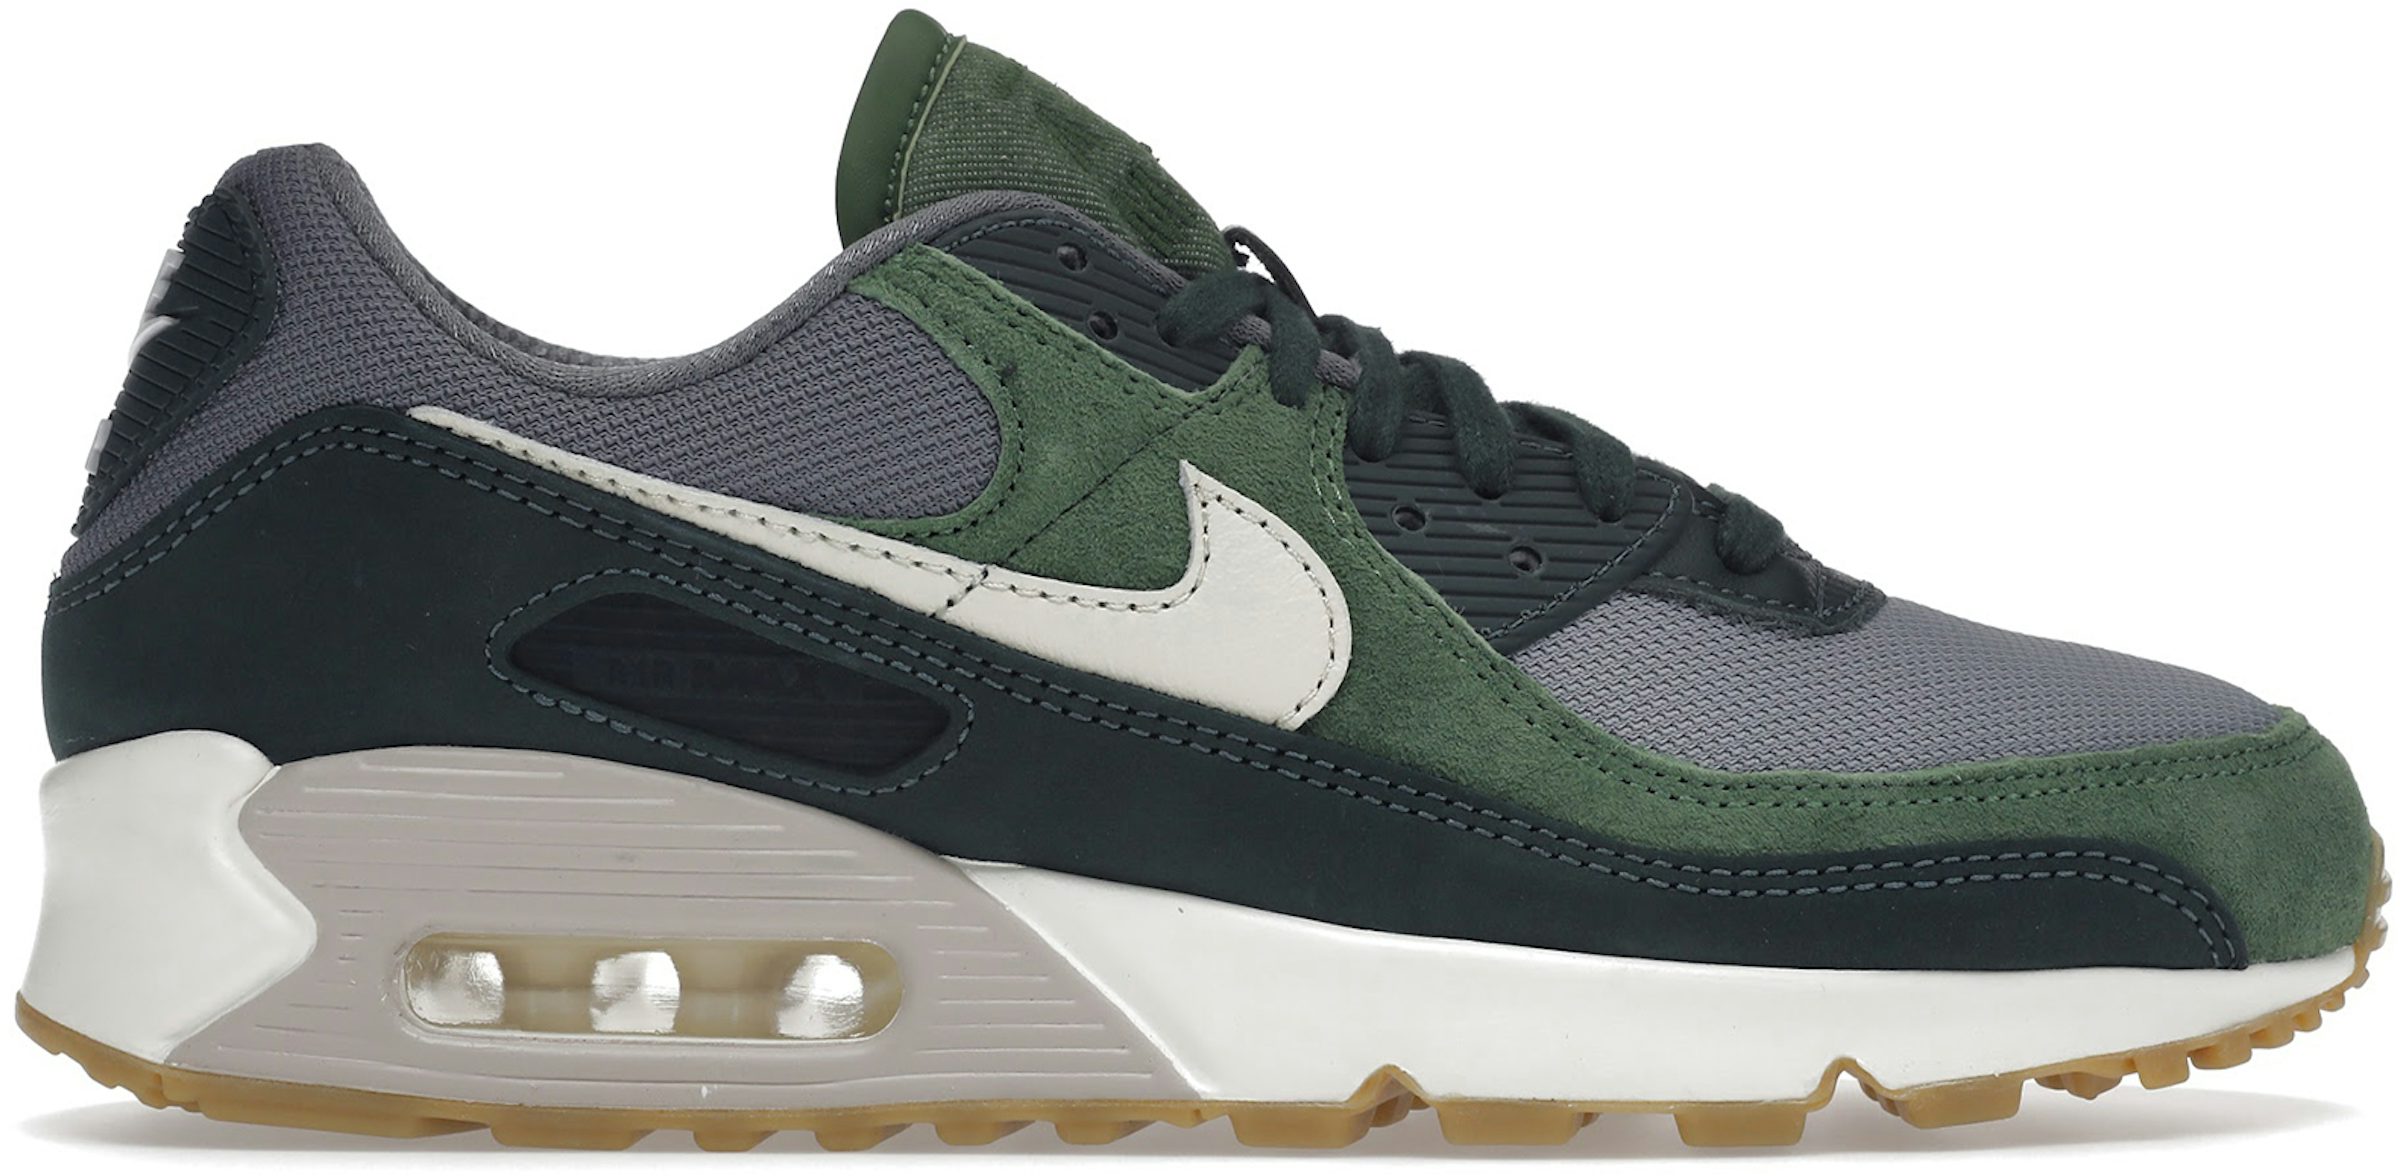 projector Reusachtig plan Nike Air Max 90 PRM Pro Green Pale Ivory Men's - DH4621-300 - US